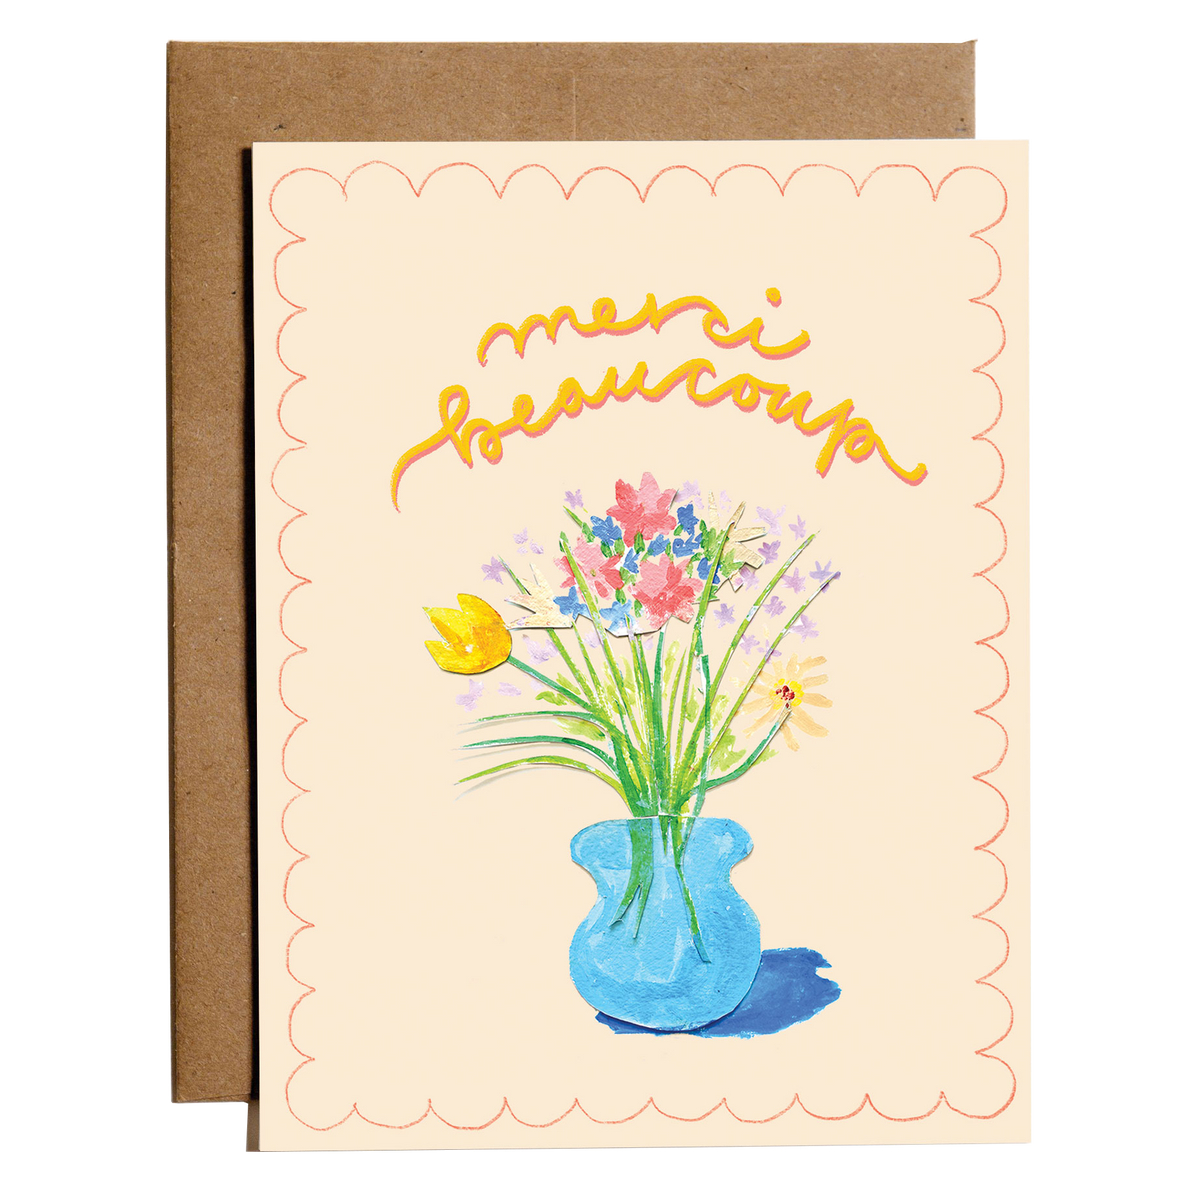 Merci Beaucoup - Thank You Very Much In French Greeting Card